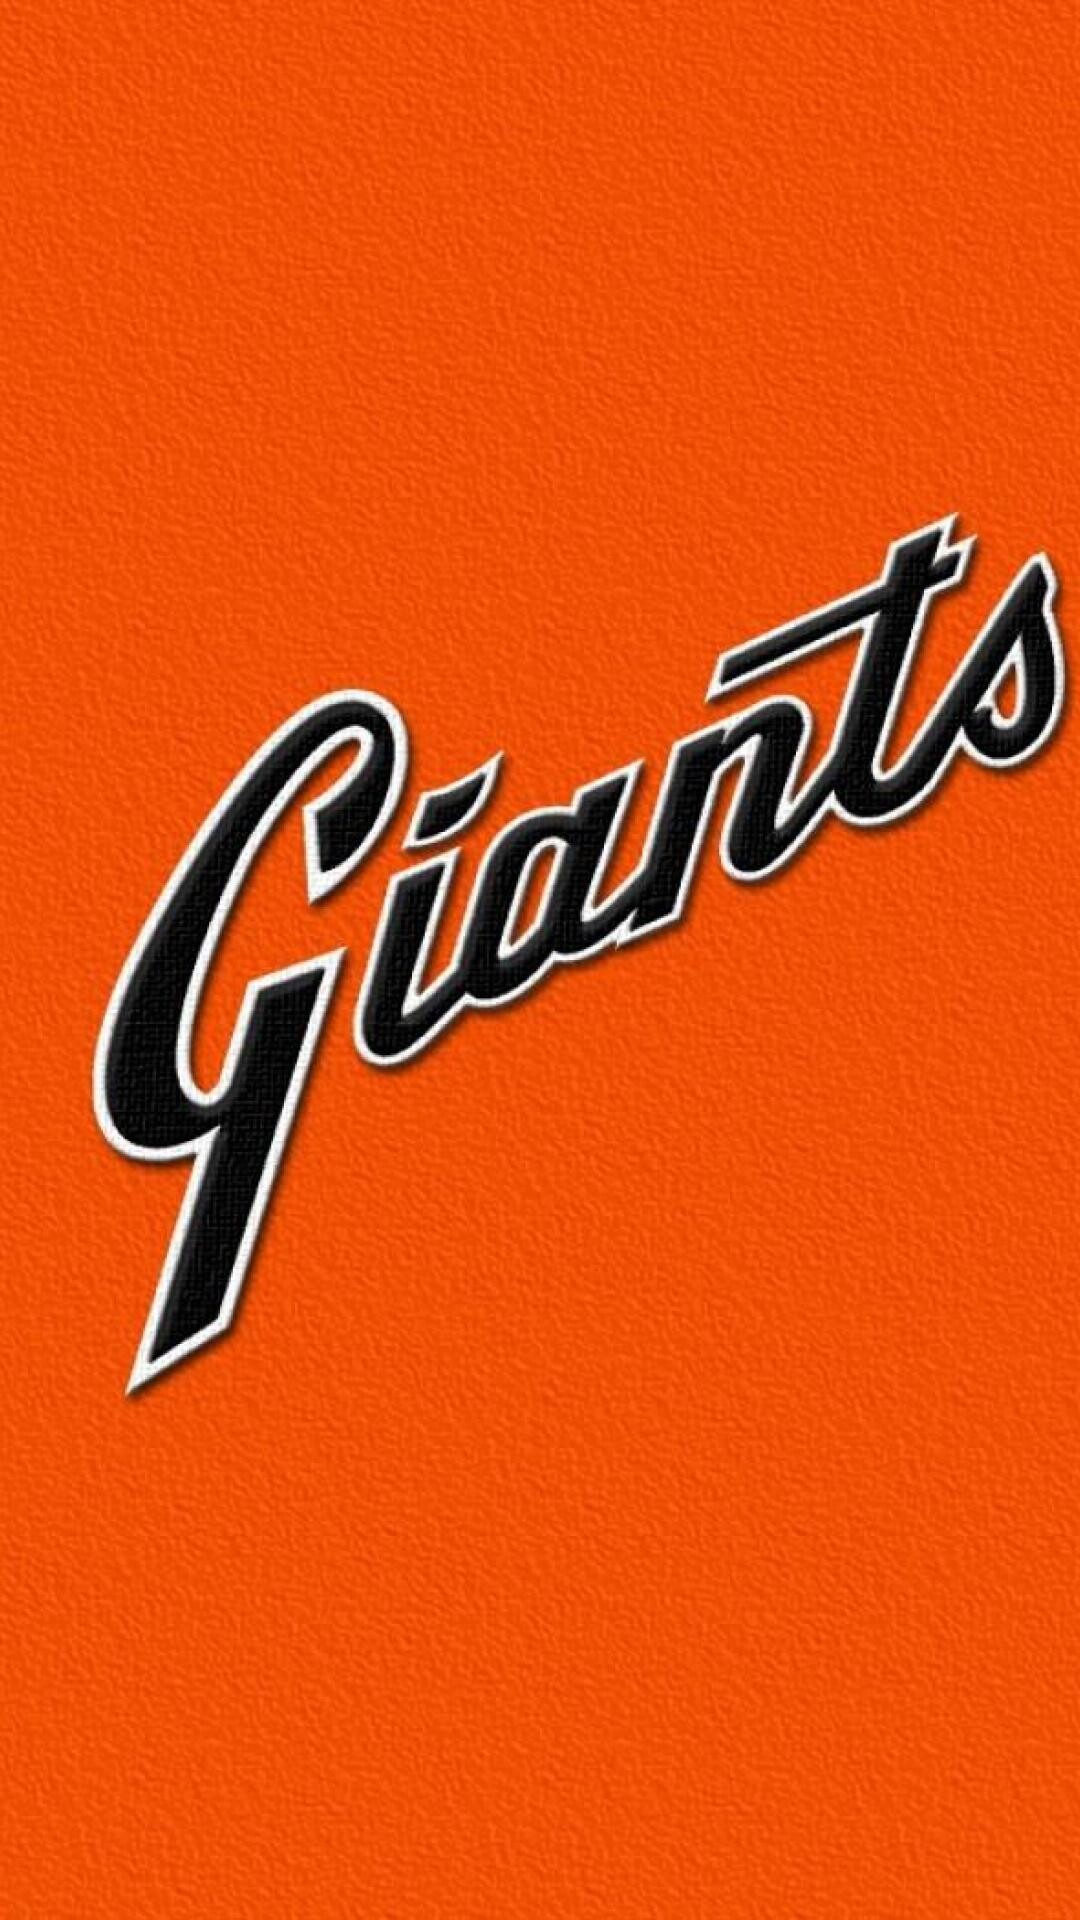 San Francisco Giants: Five-time World Series championships winners, The Baseball Hall of Fame members. 1080x1920 Full HD Background.